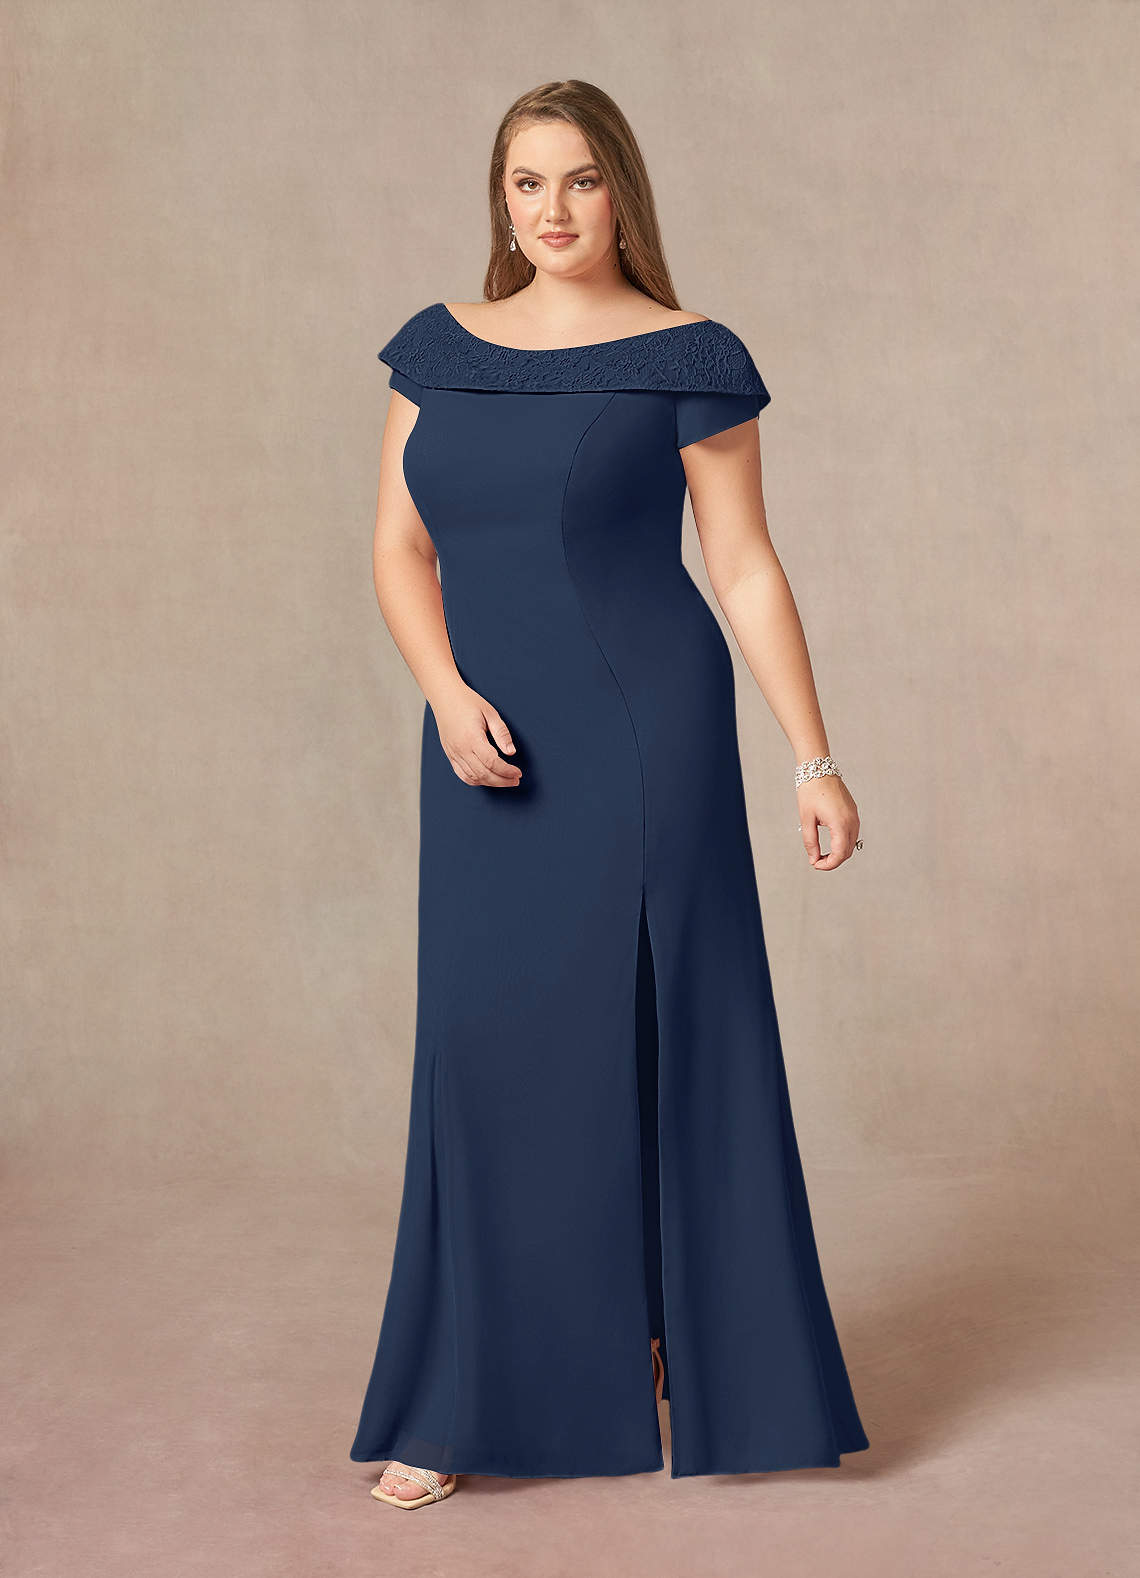 Azazie Cupid Mother of the Bride Dresses A-Line Boatneck Lace Chiffon Floor-Length Dress image1